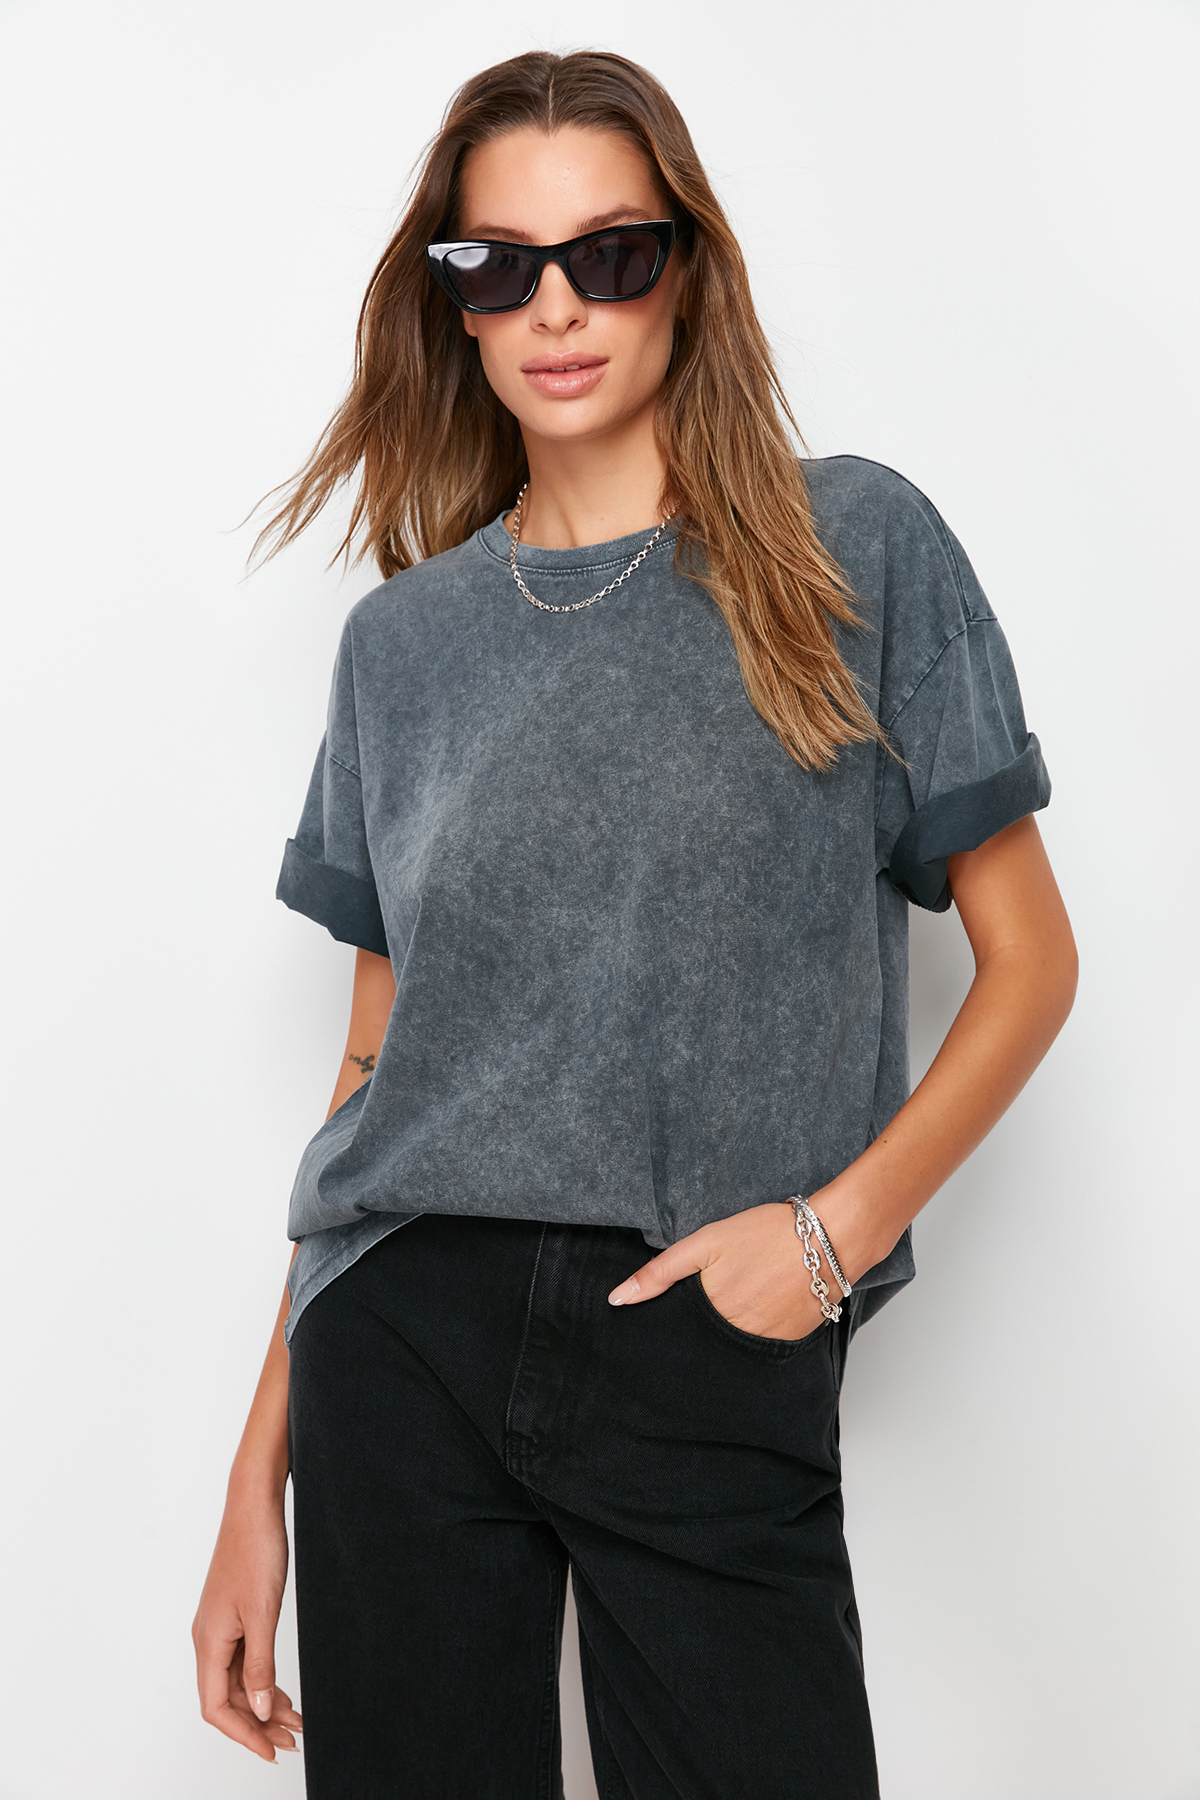 Trendyol Anthracite 100% Cotton Faded Effect Back Printed Oversize/Comfort Fit Knitted T-Shirt